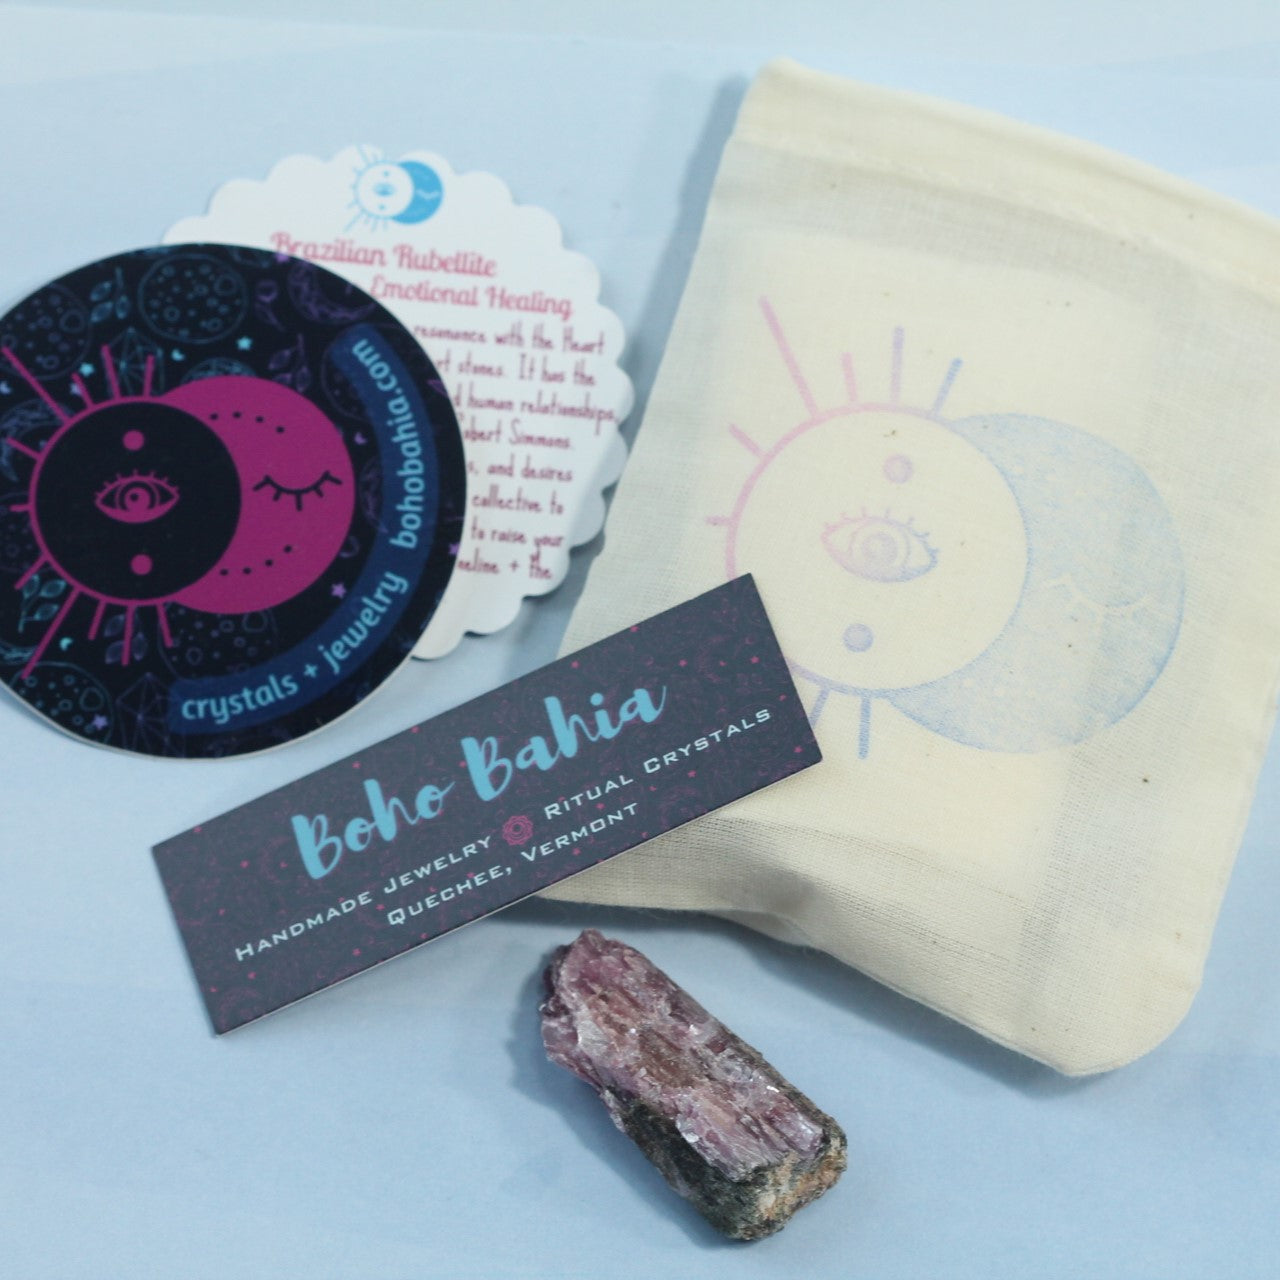 Real brazilian crystals arrive gift wrapped in a gift bag with a metaphysical crystal card